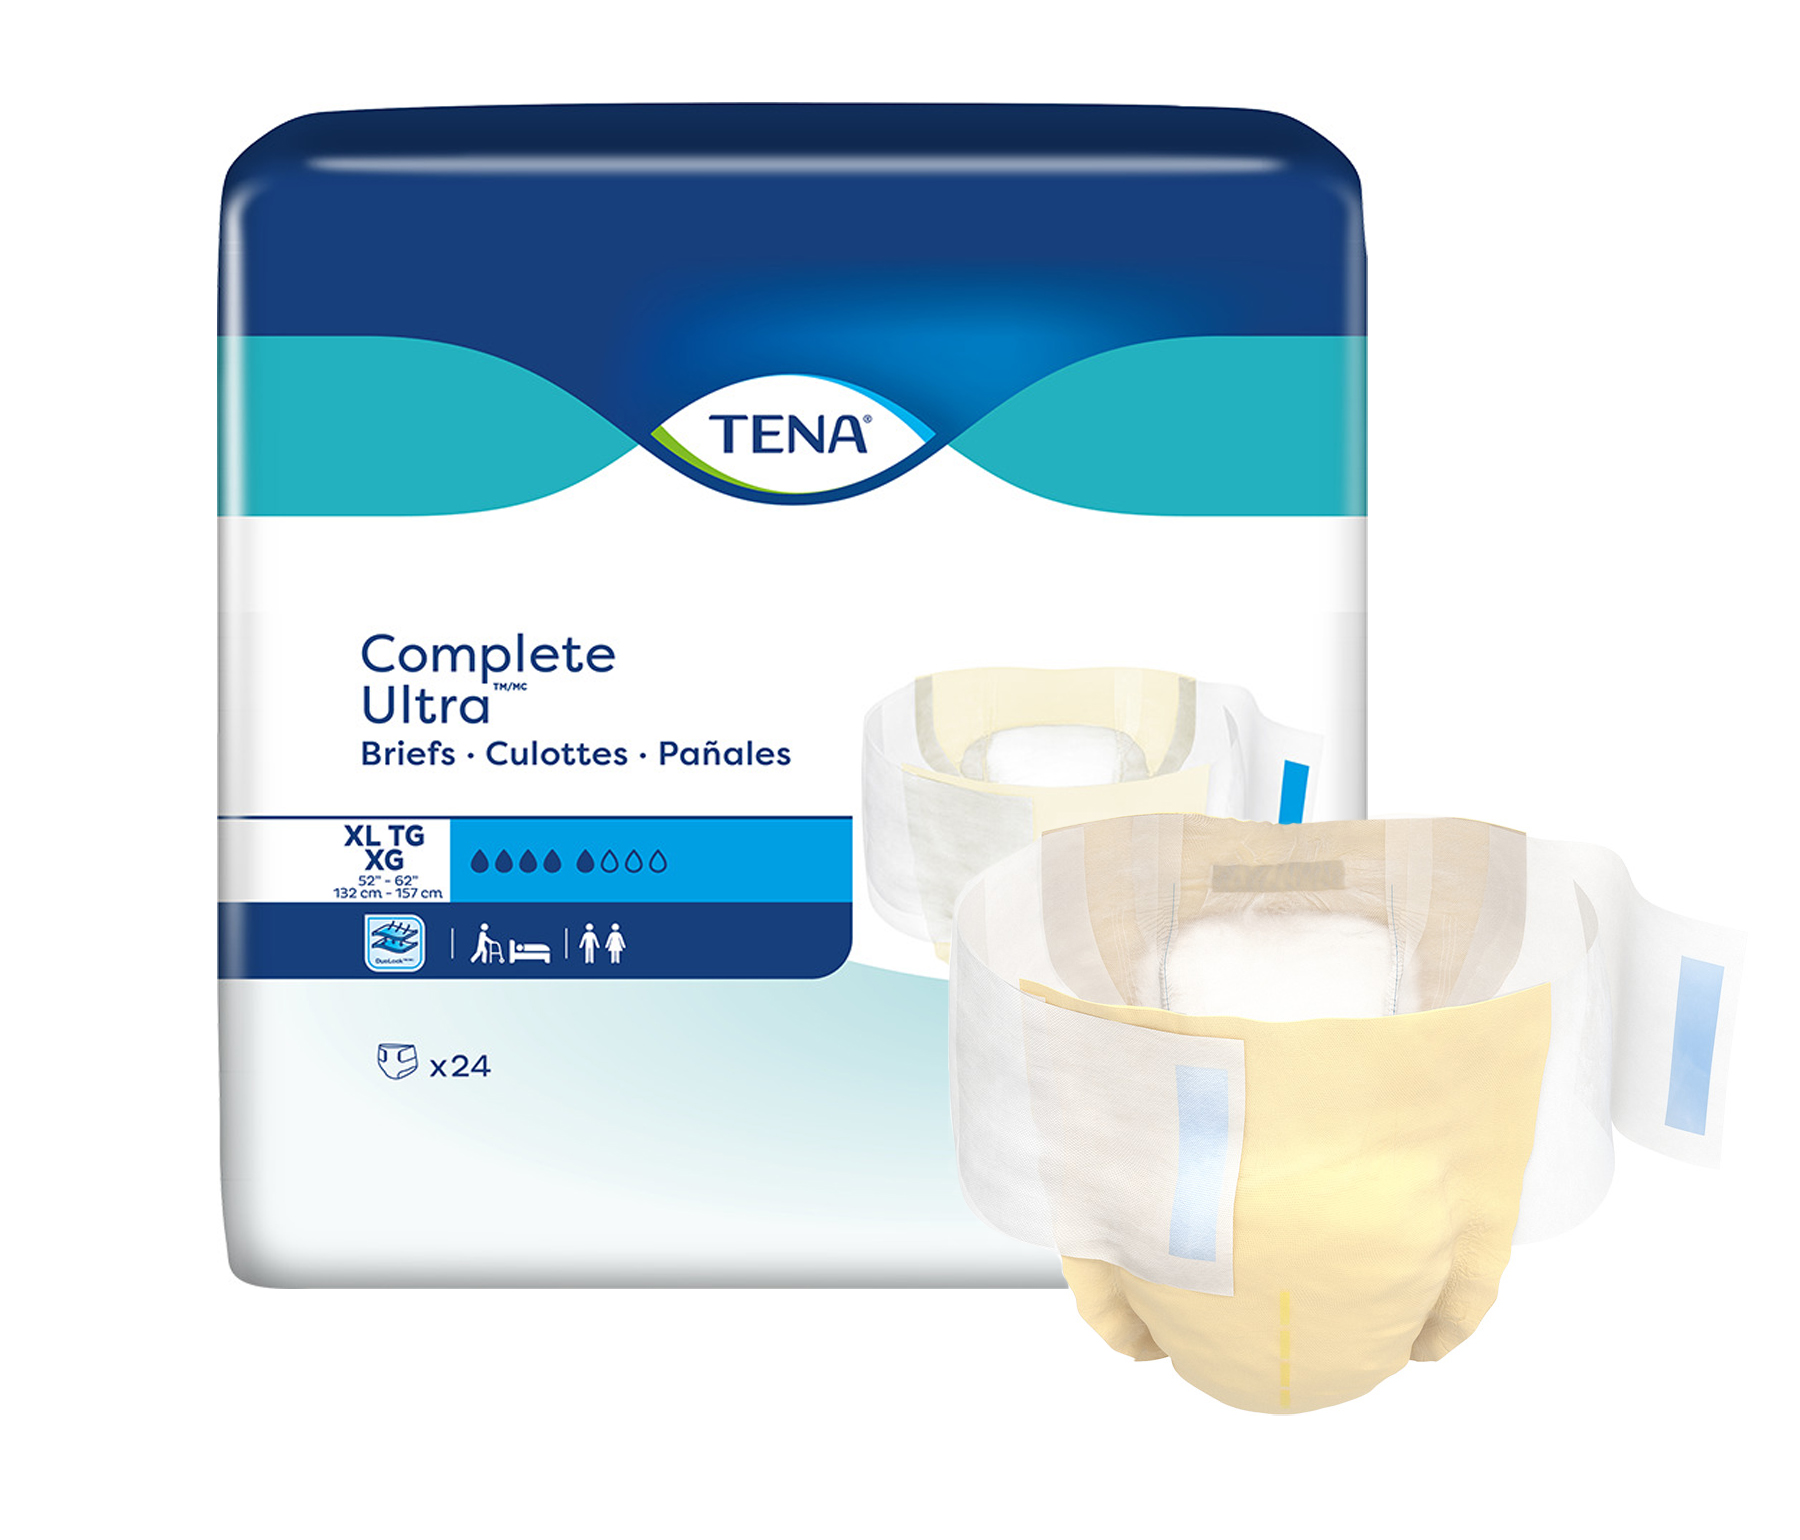 TENA Complete Ultra Incontinence Brief, Moderate Absorbency, X-Large, 67342, Pack of 24